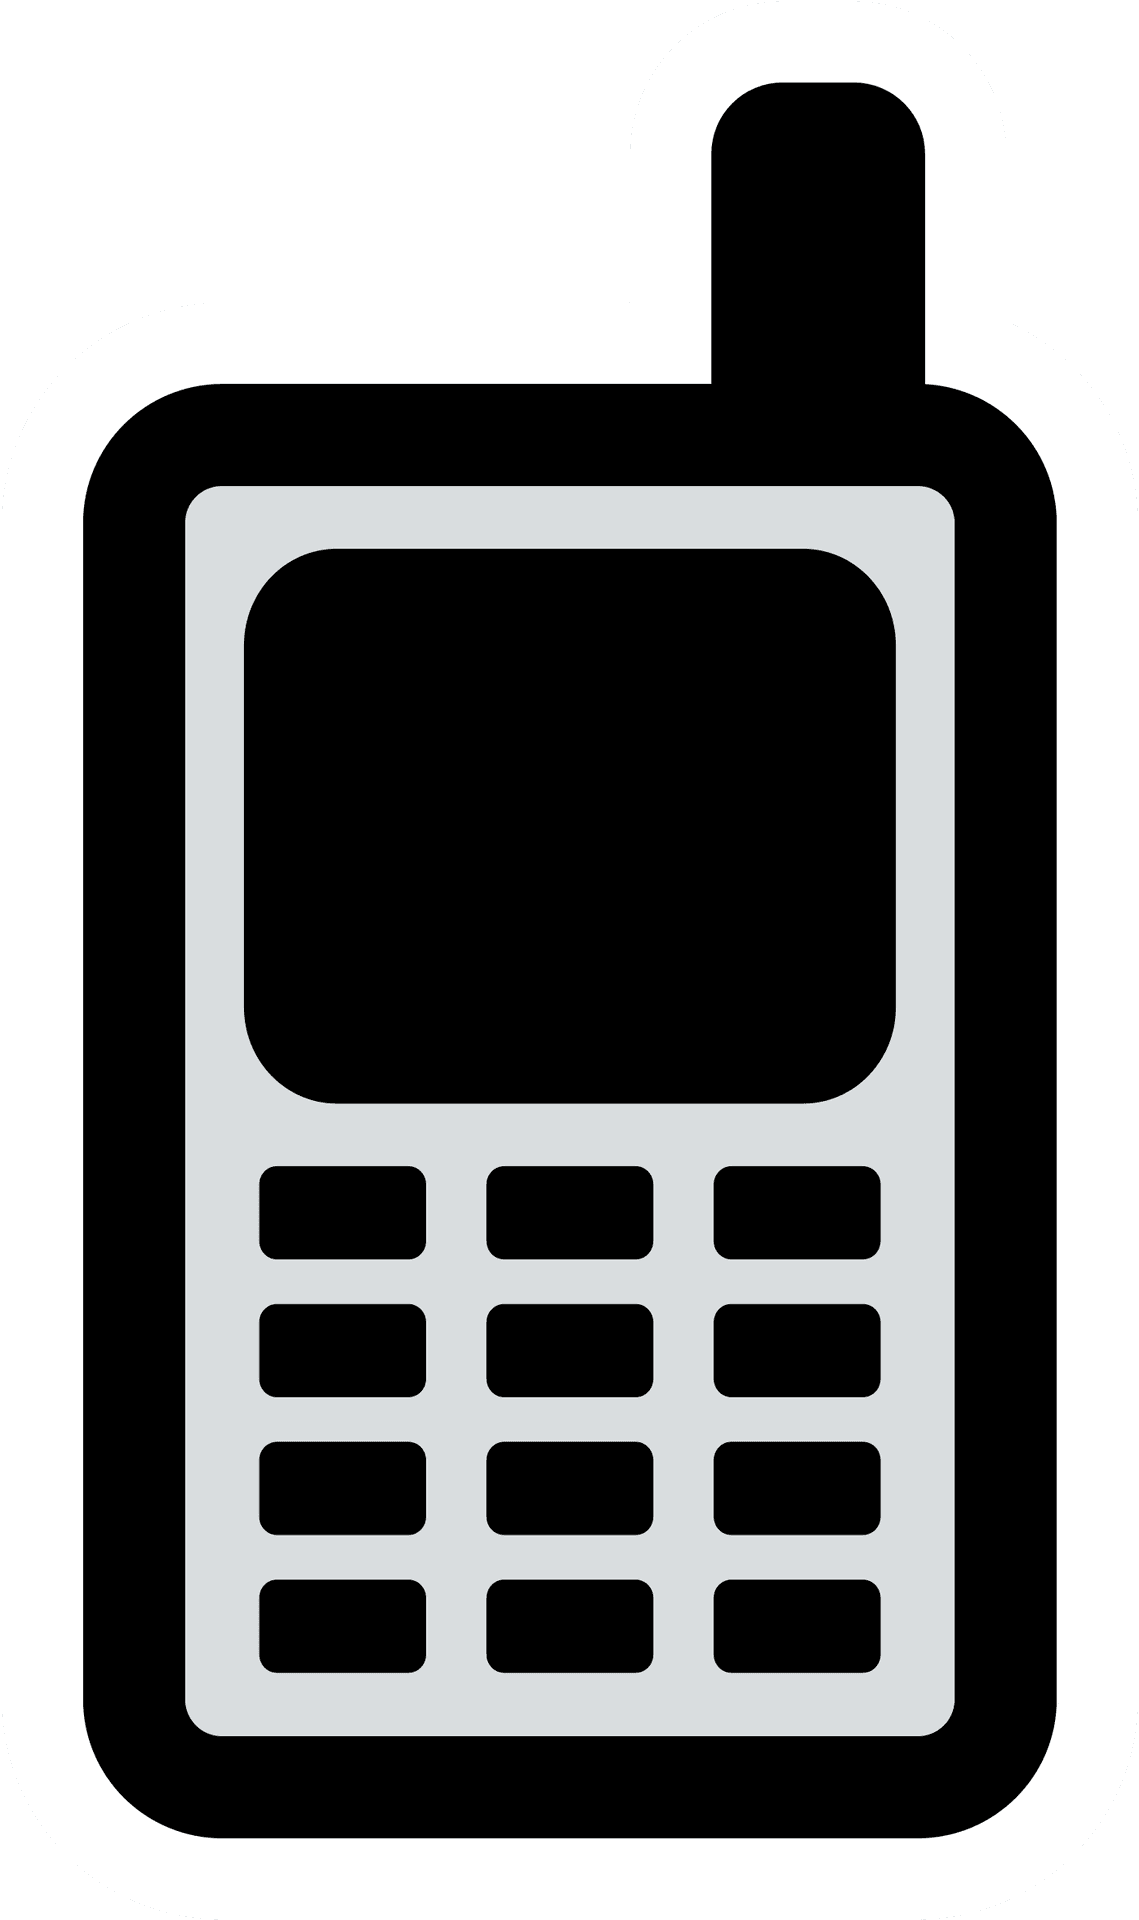 Basic Mobile Phone Clipart PNG image